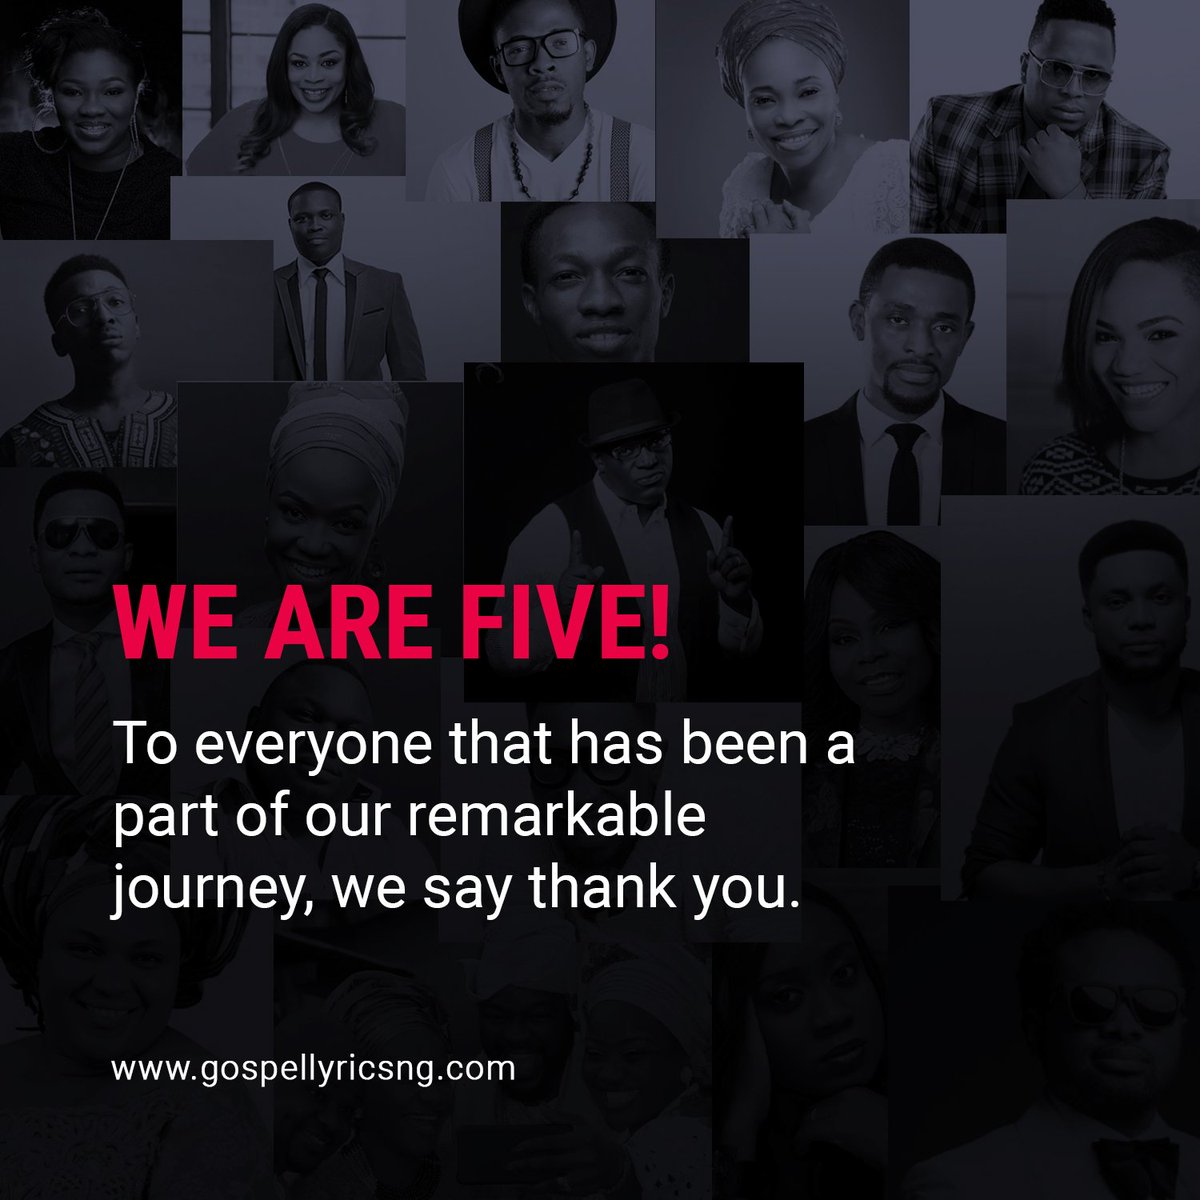 #GospellyricsngAt5 🎉

8 Million Visits
130,000 Followers
2,800 Lyrics
1,500 Artistes
15 Countries
10 Active Contributors
One GOD & One You
One Vision

--

To everyone that has been a part of our remarkable journey, we say thank you.

#gospellyricsng #weare5 #anniversary